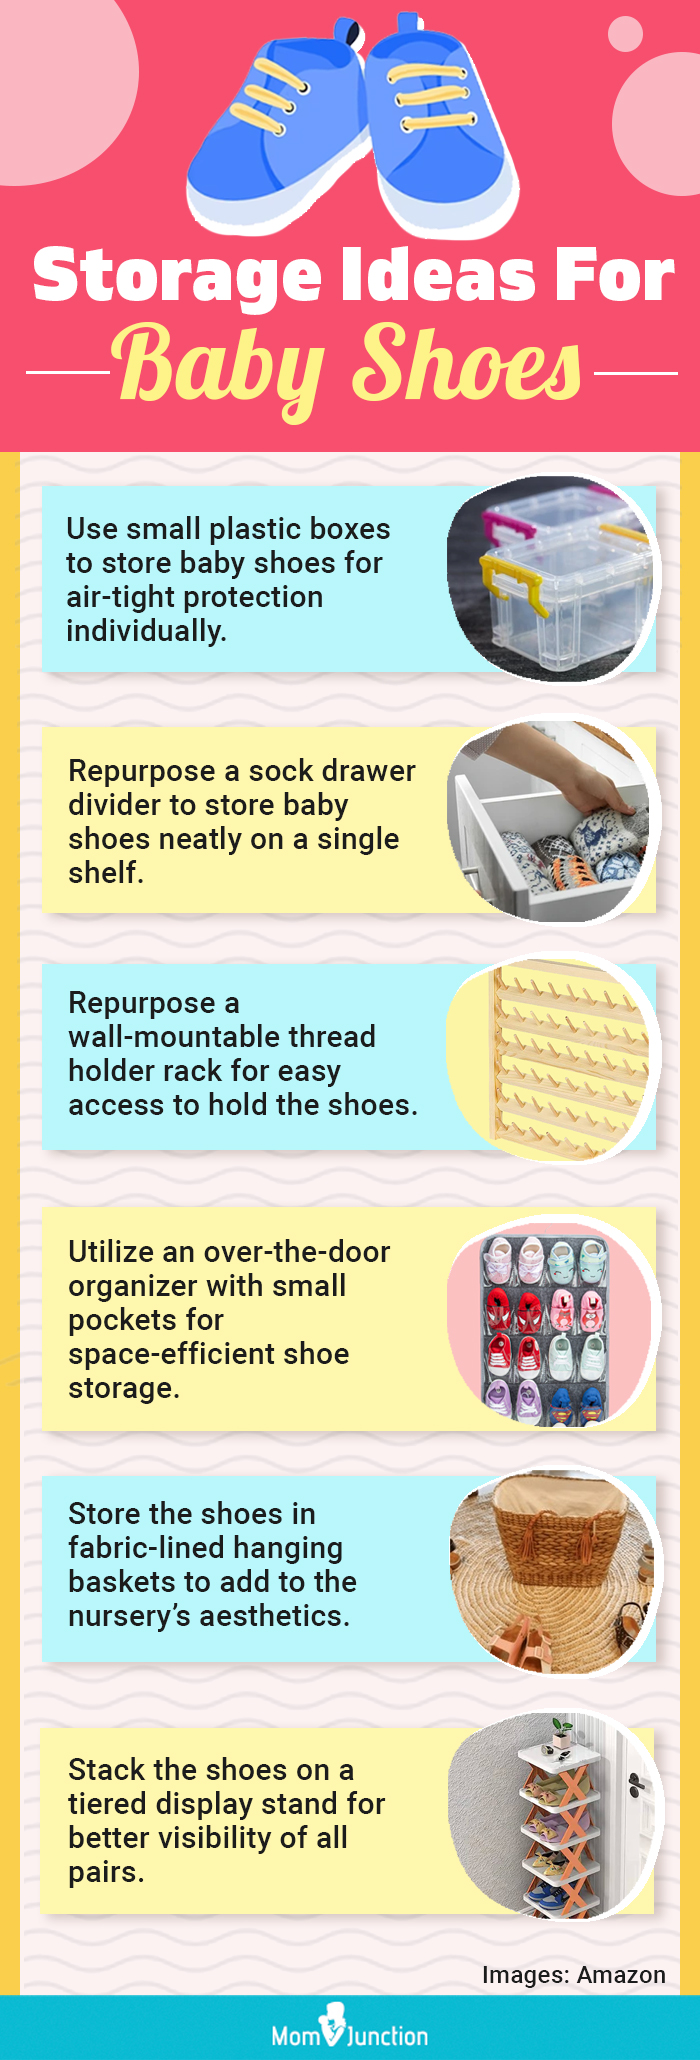  Storage Ideas For Baby Shoes (infographic)